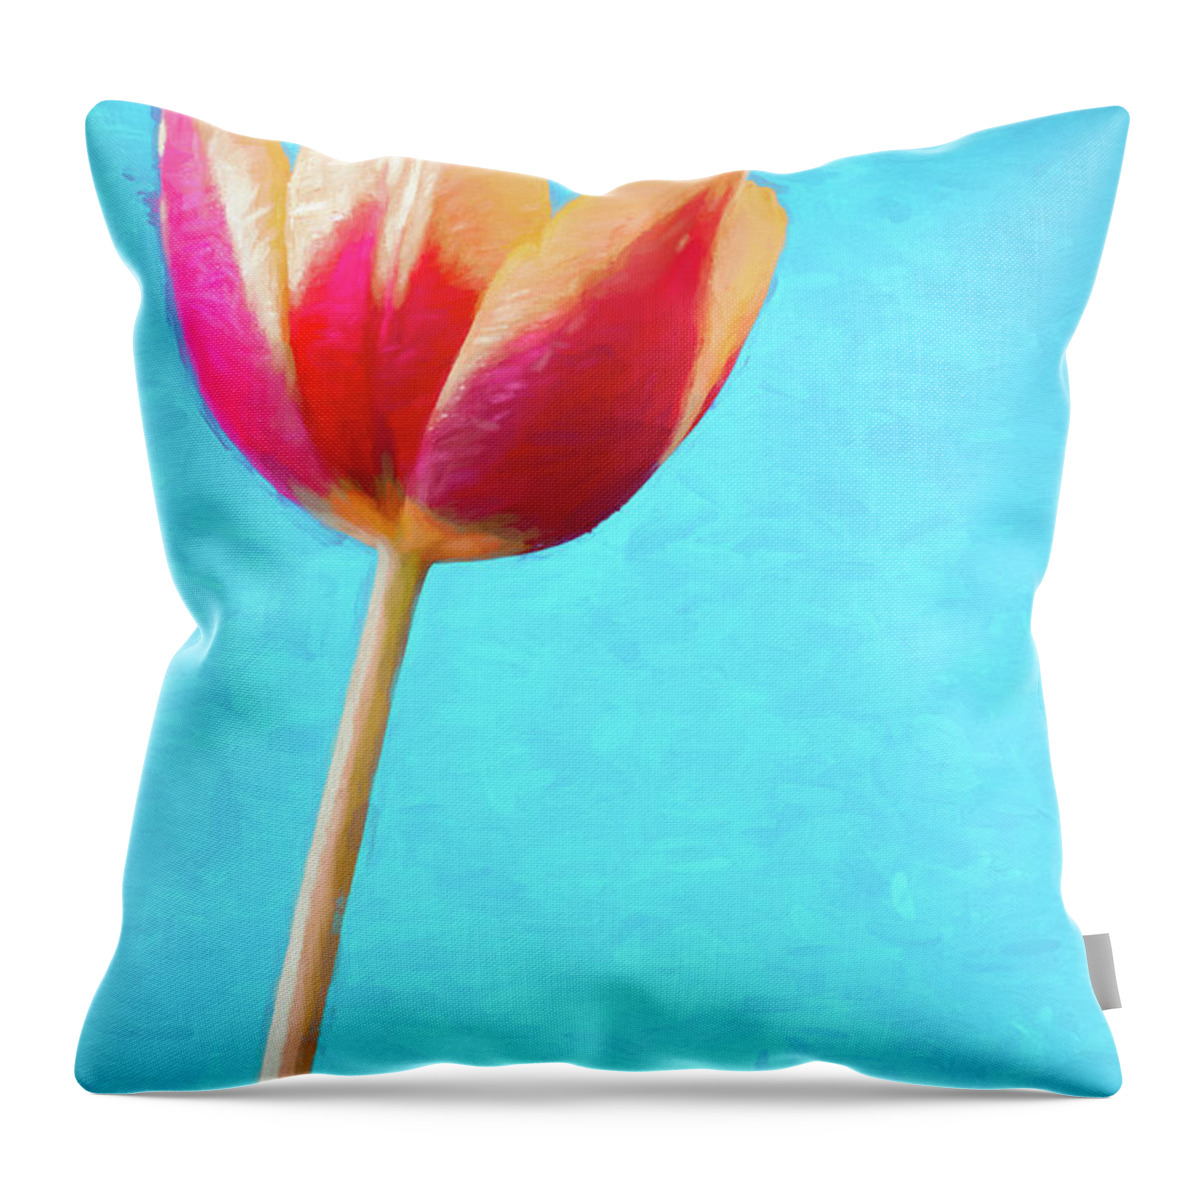 Tulip Throw Pillow featuring the digital art Painted Tulip On Blue 2 by Tanya C Smith